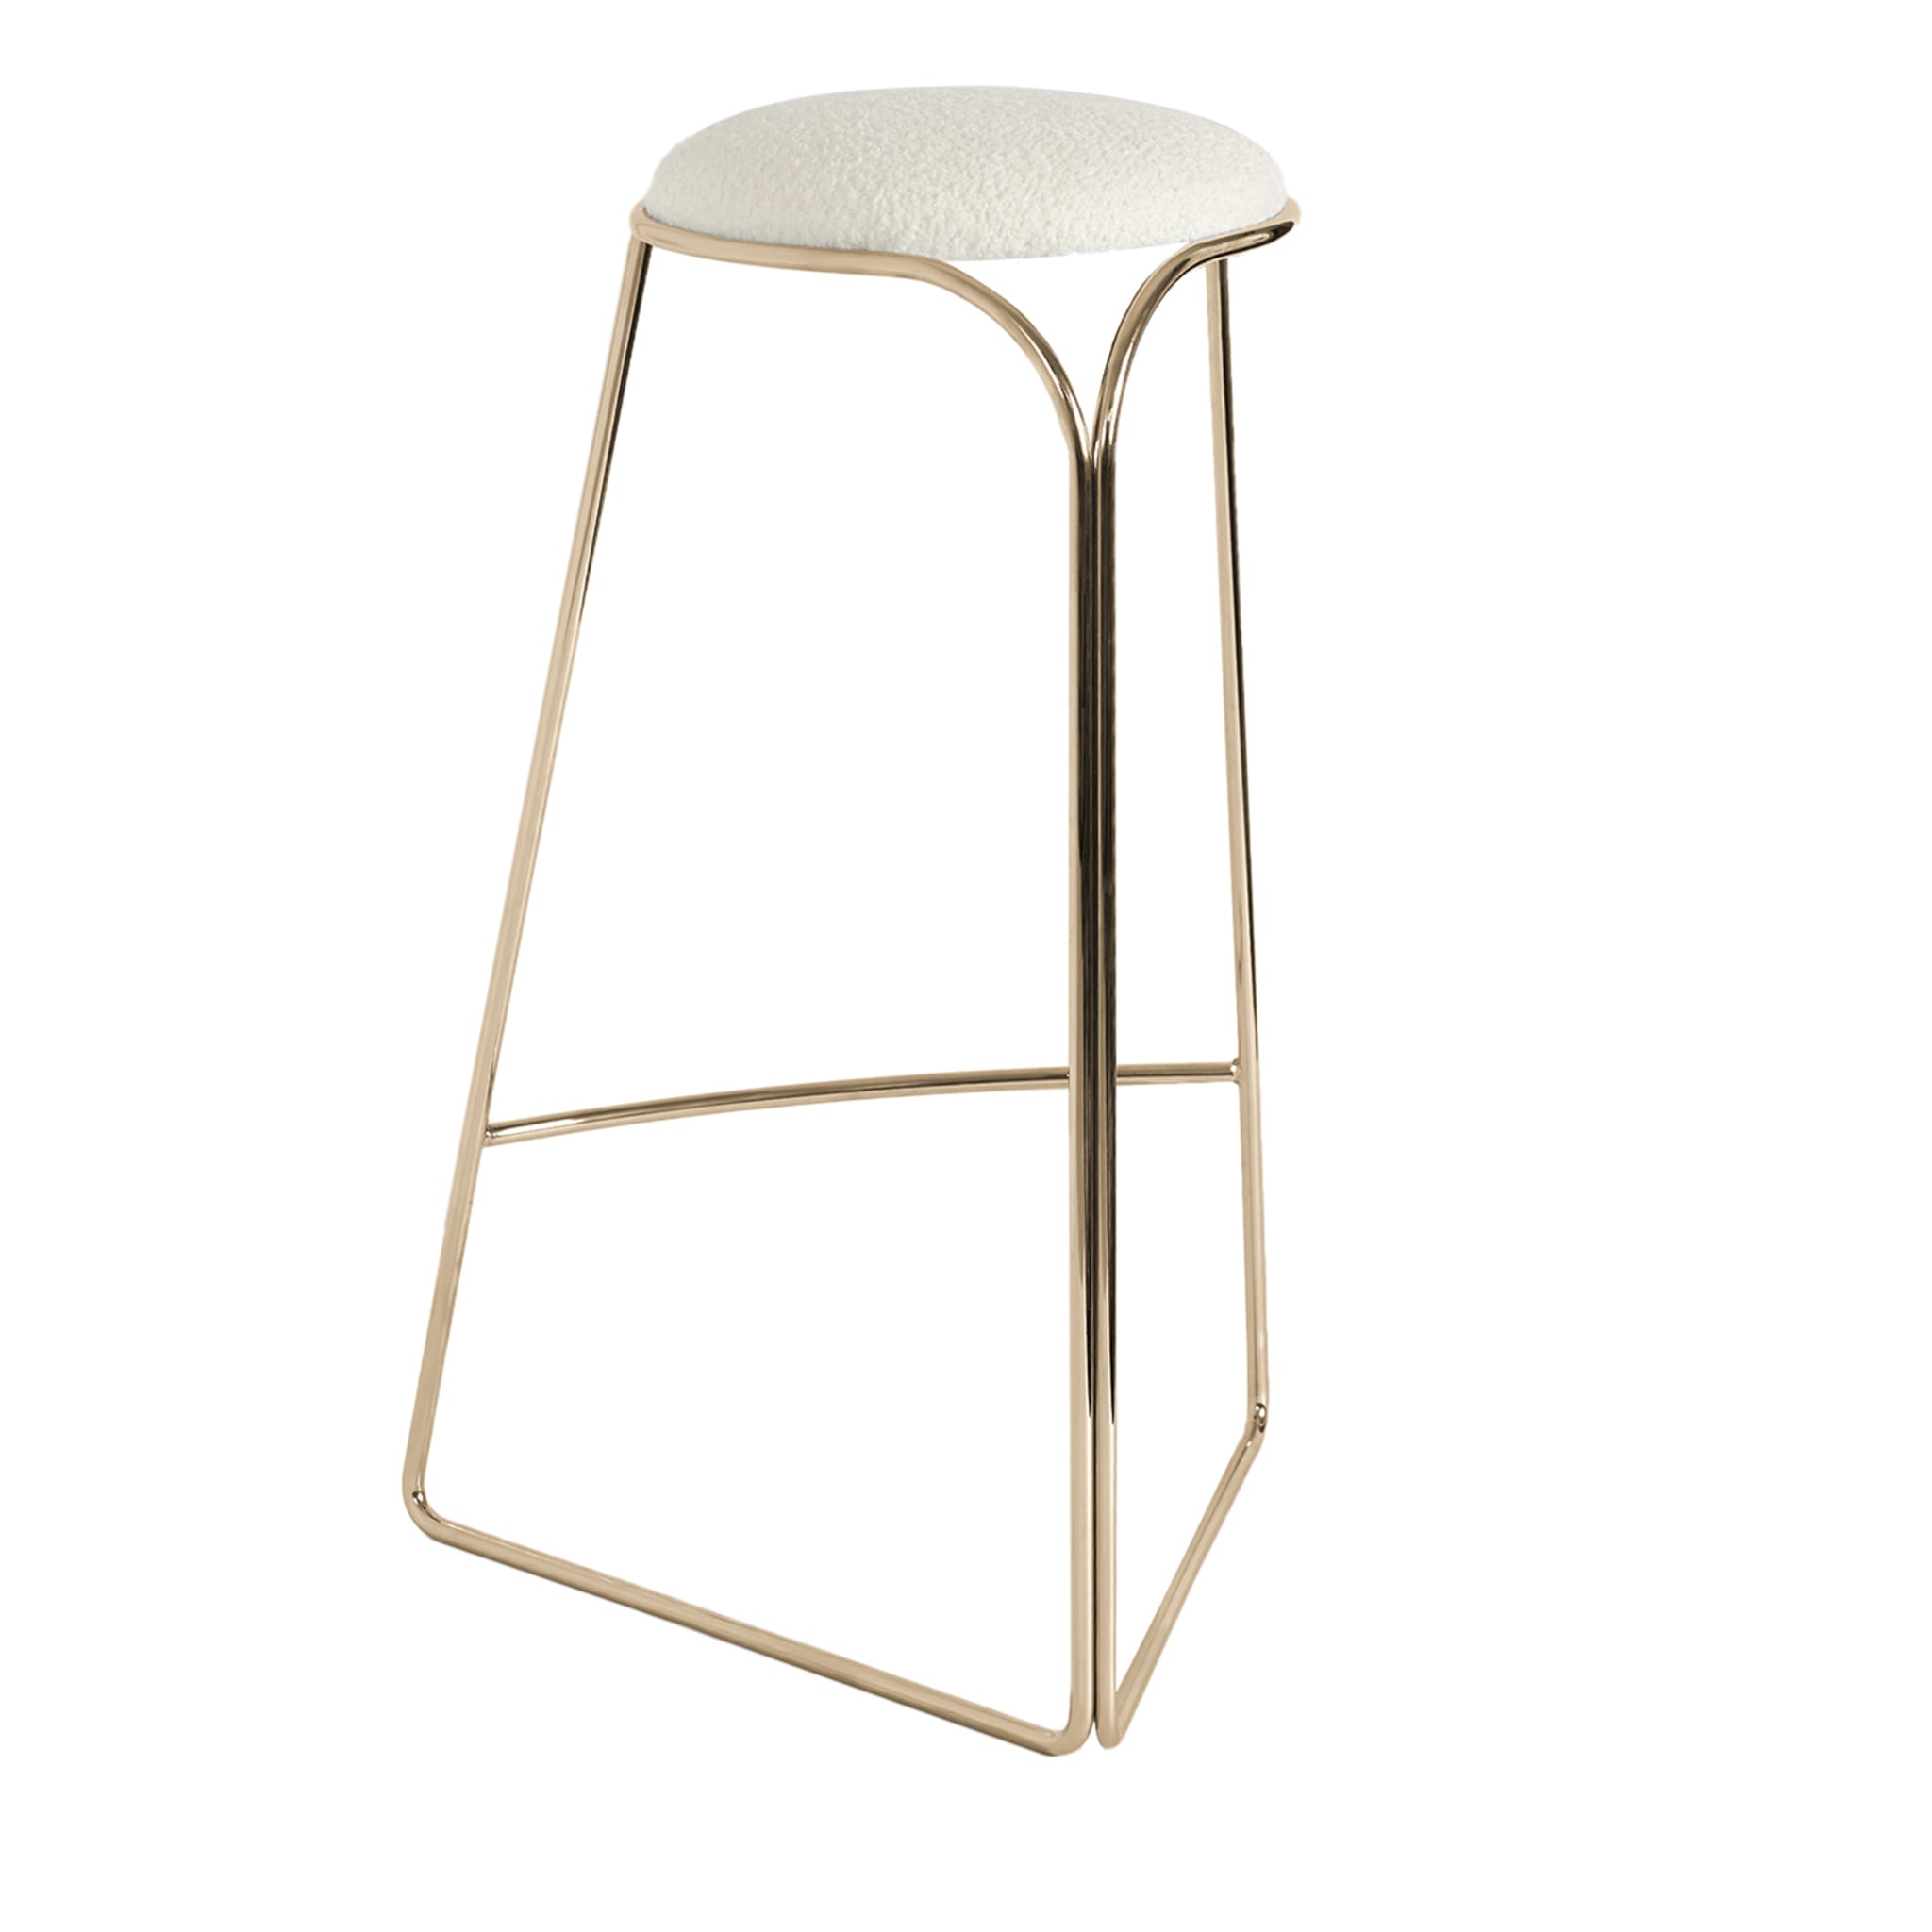 FLOW SCULPTURAL GOLD AND WHITE HI STOOL - Main view